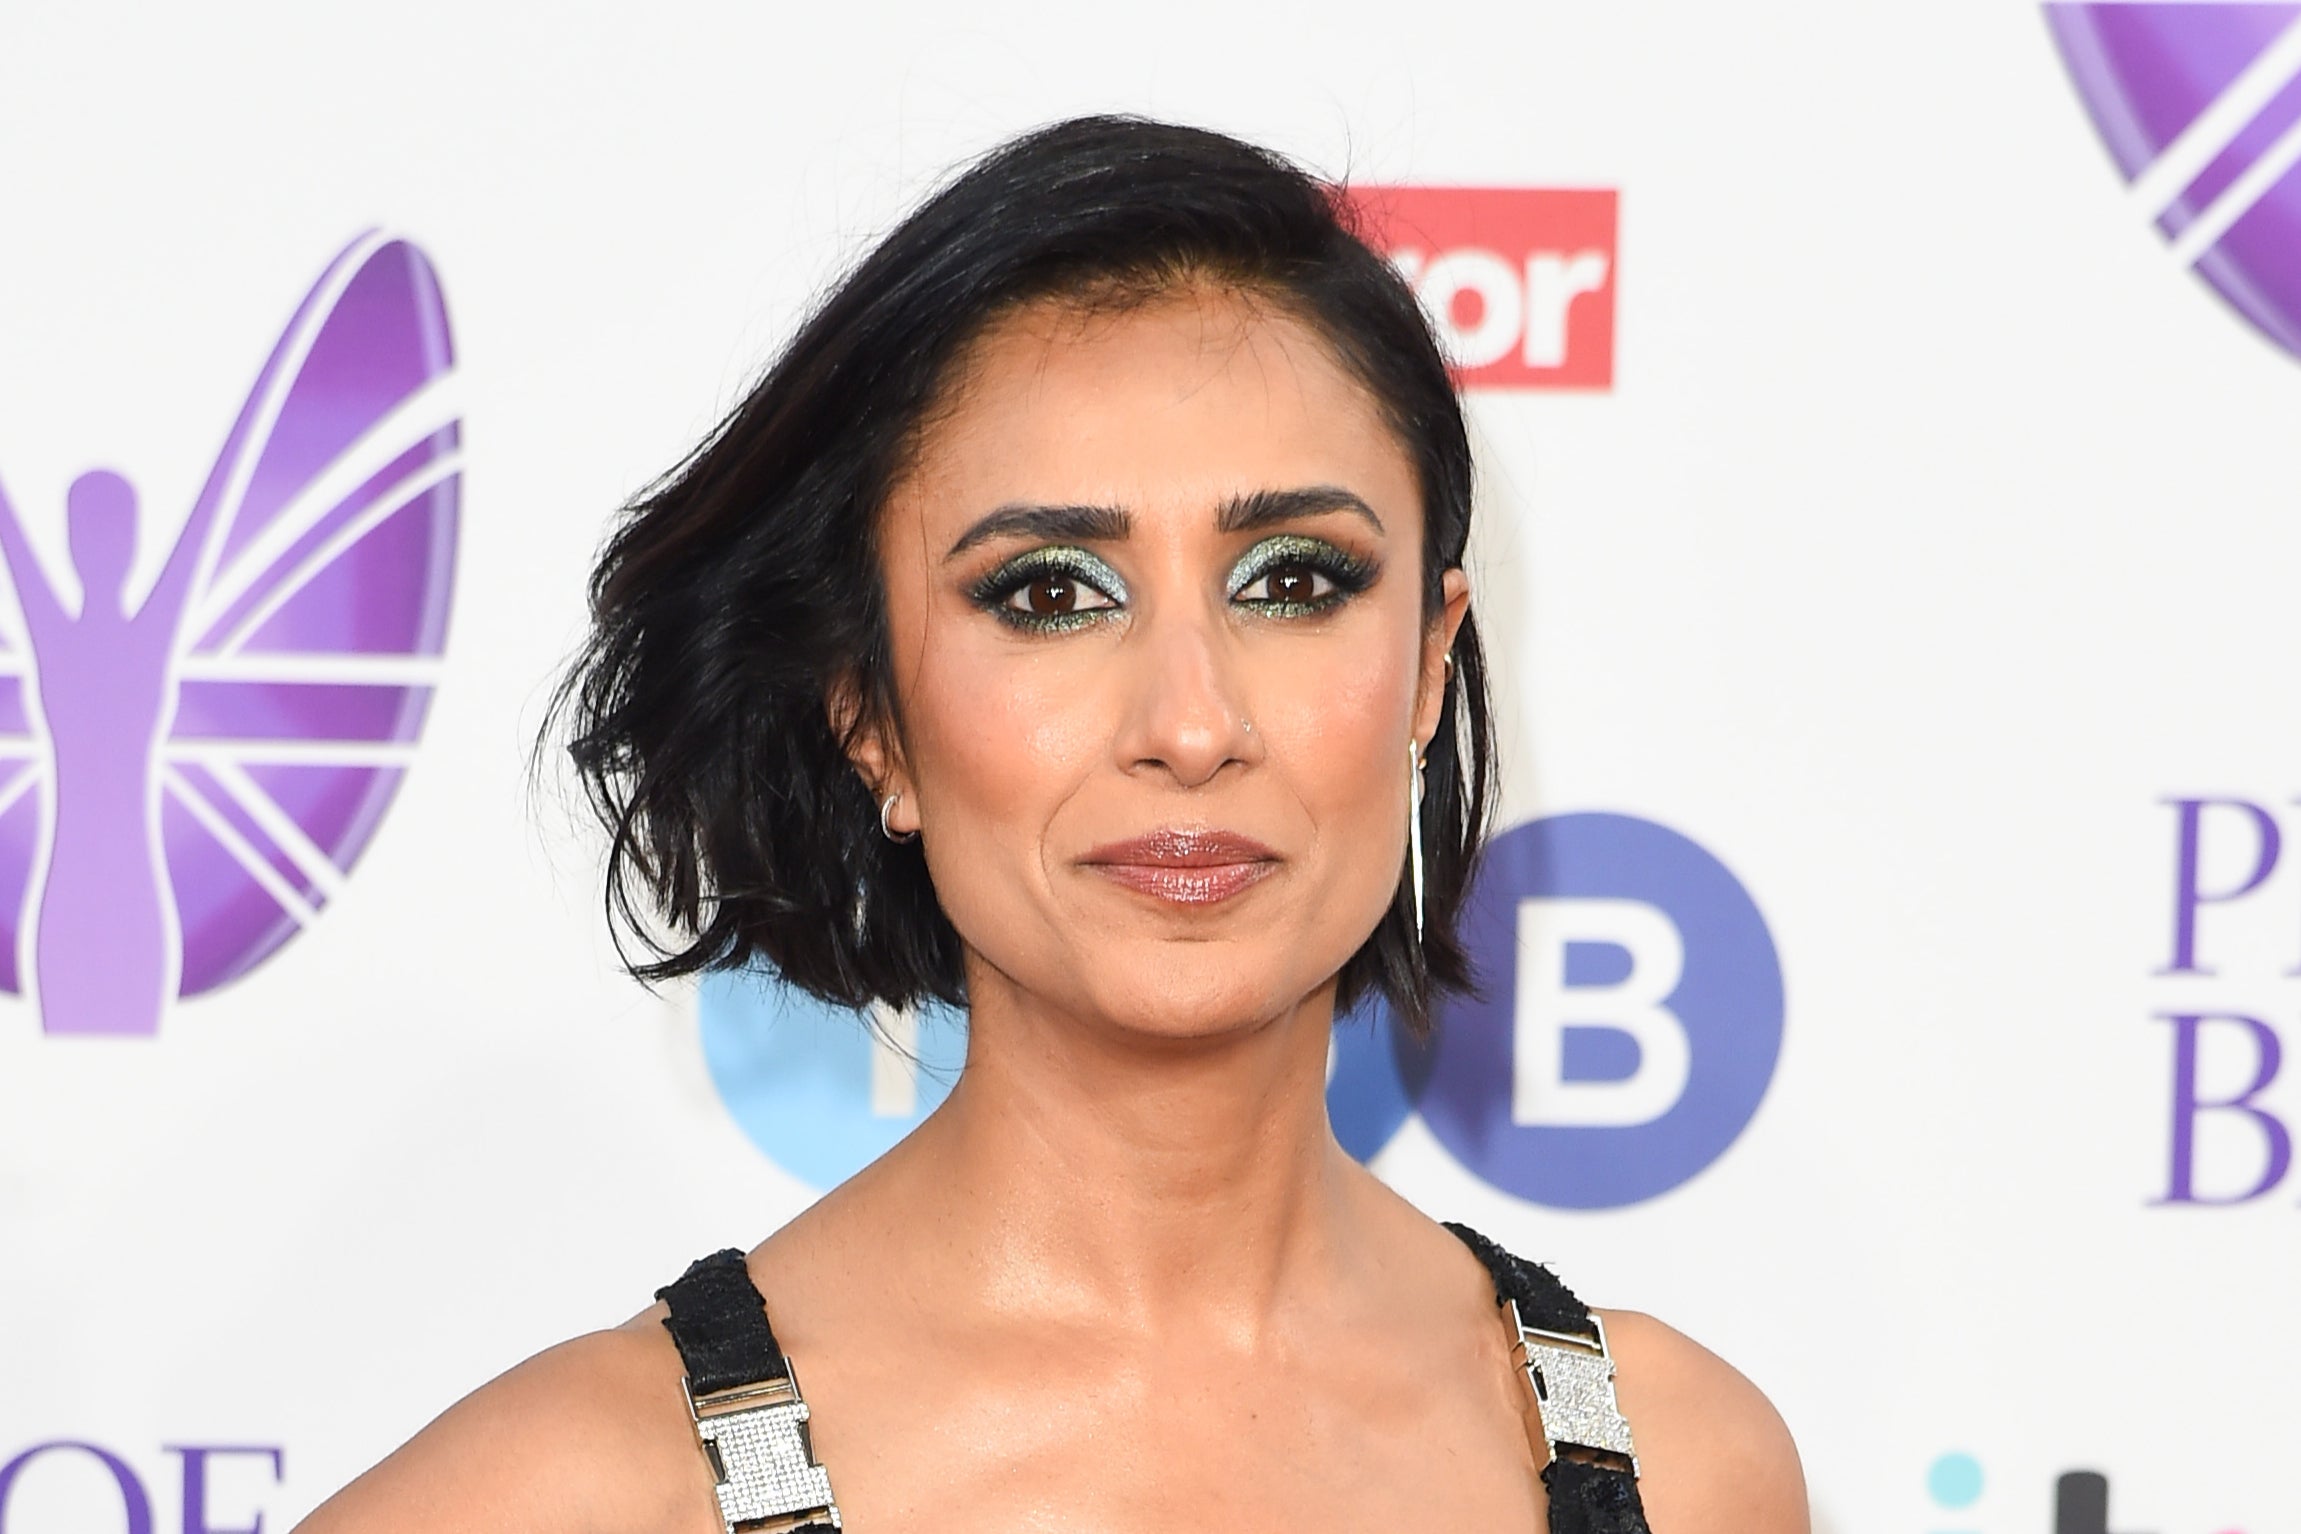 Rani presents 'Woman's Hour' from 2021 along with her role in 'Countryfile'